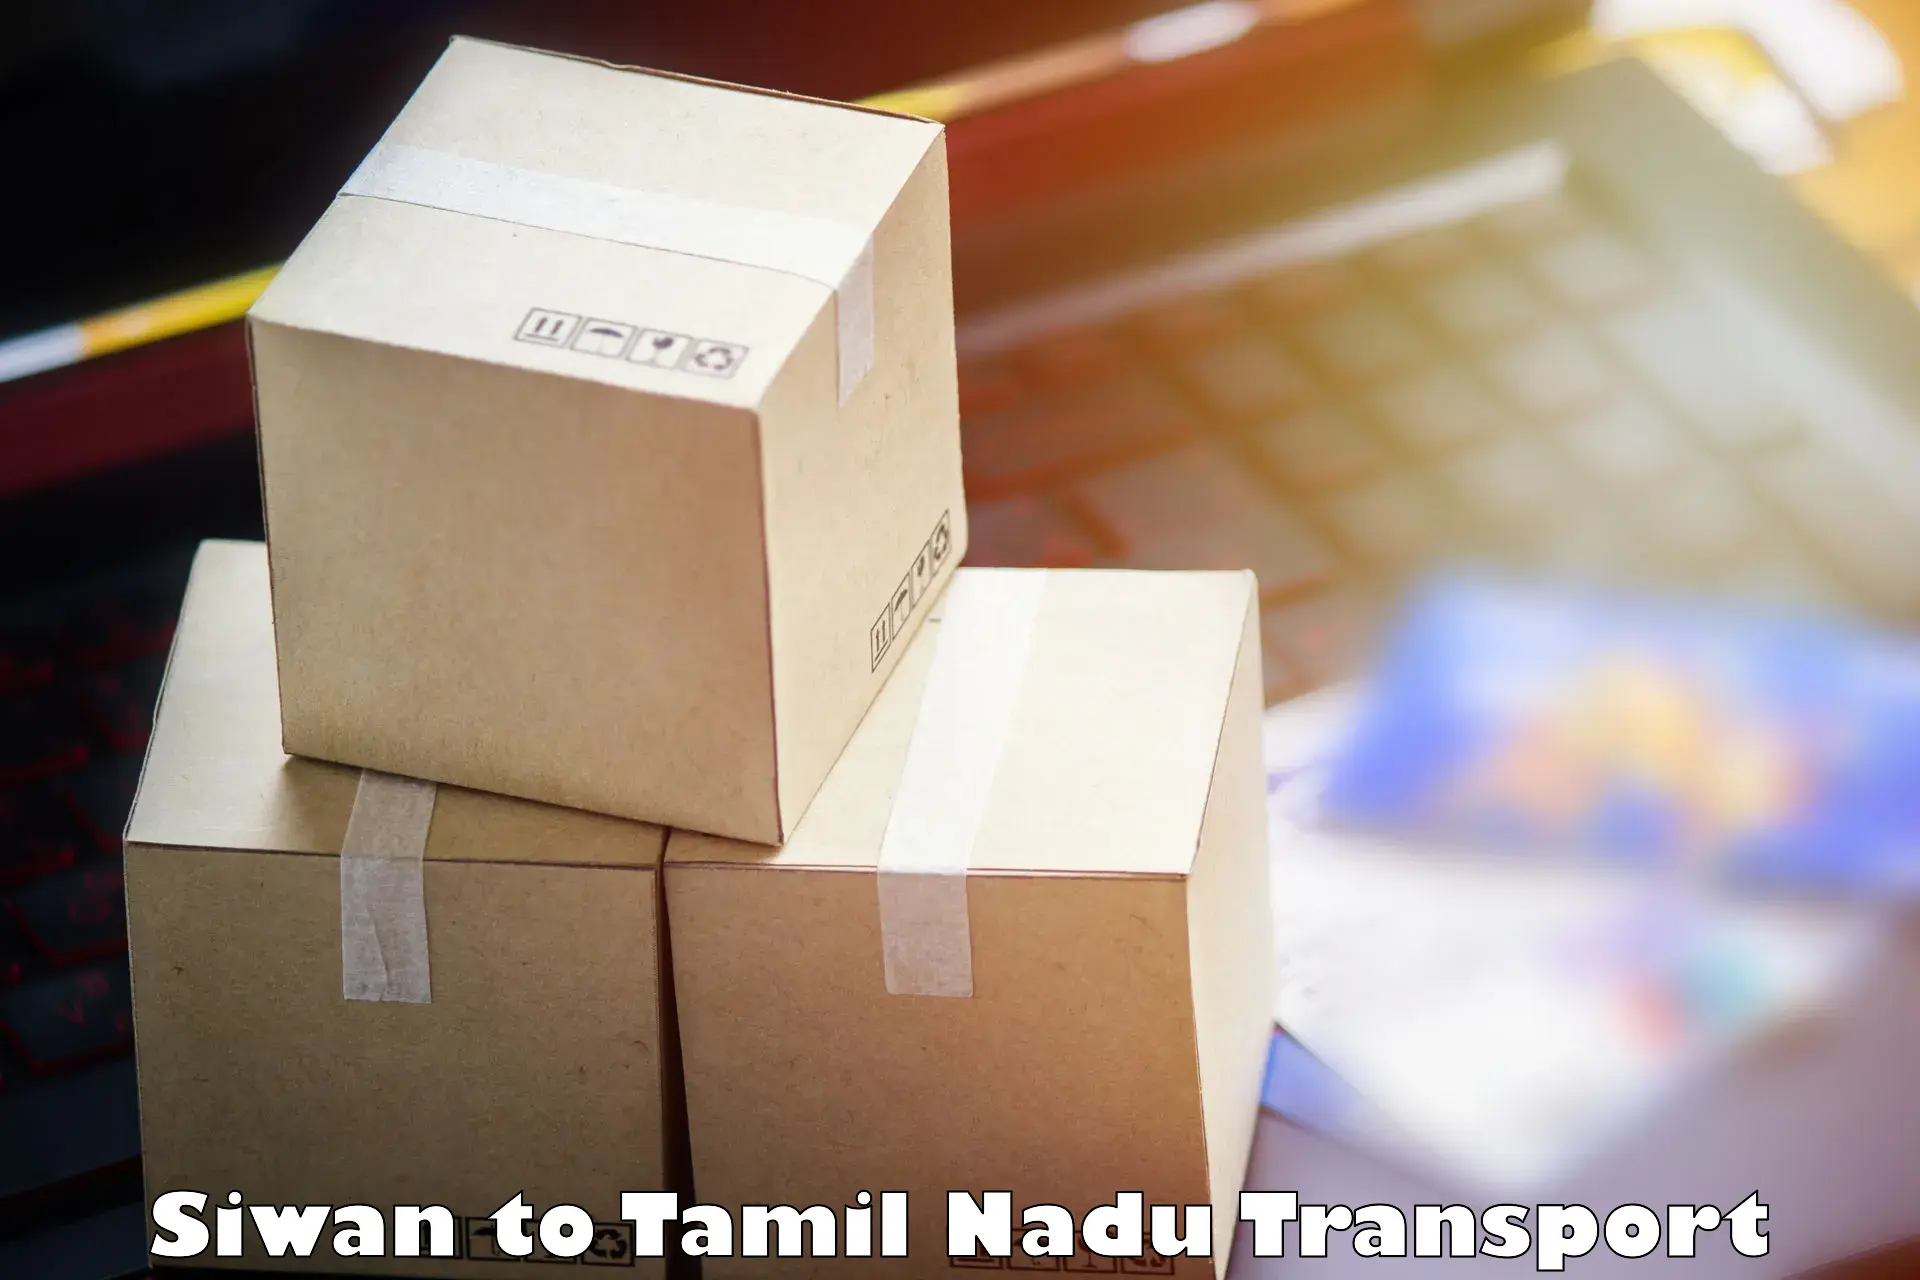 Express transport services Siwan to Mylapore